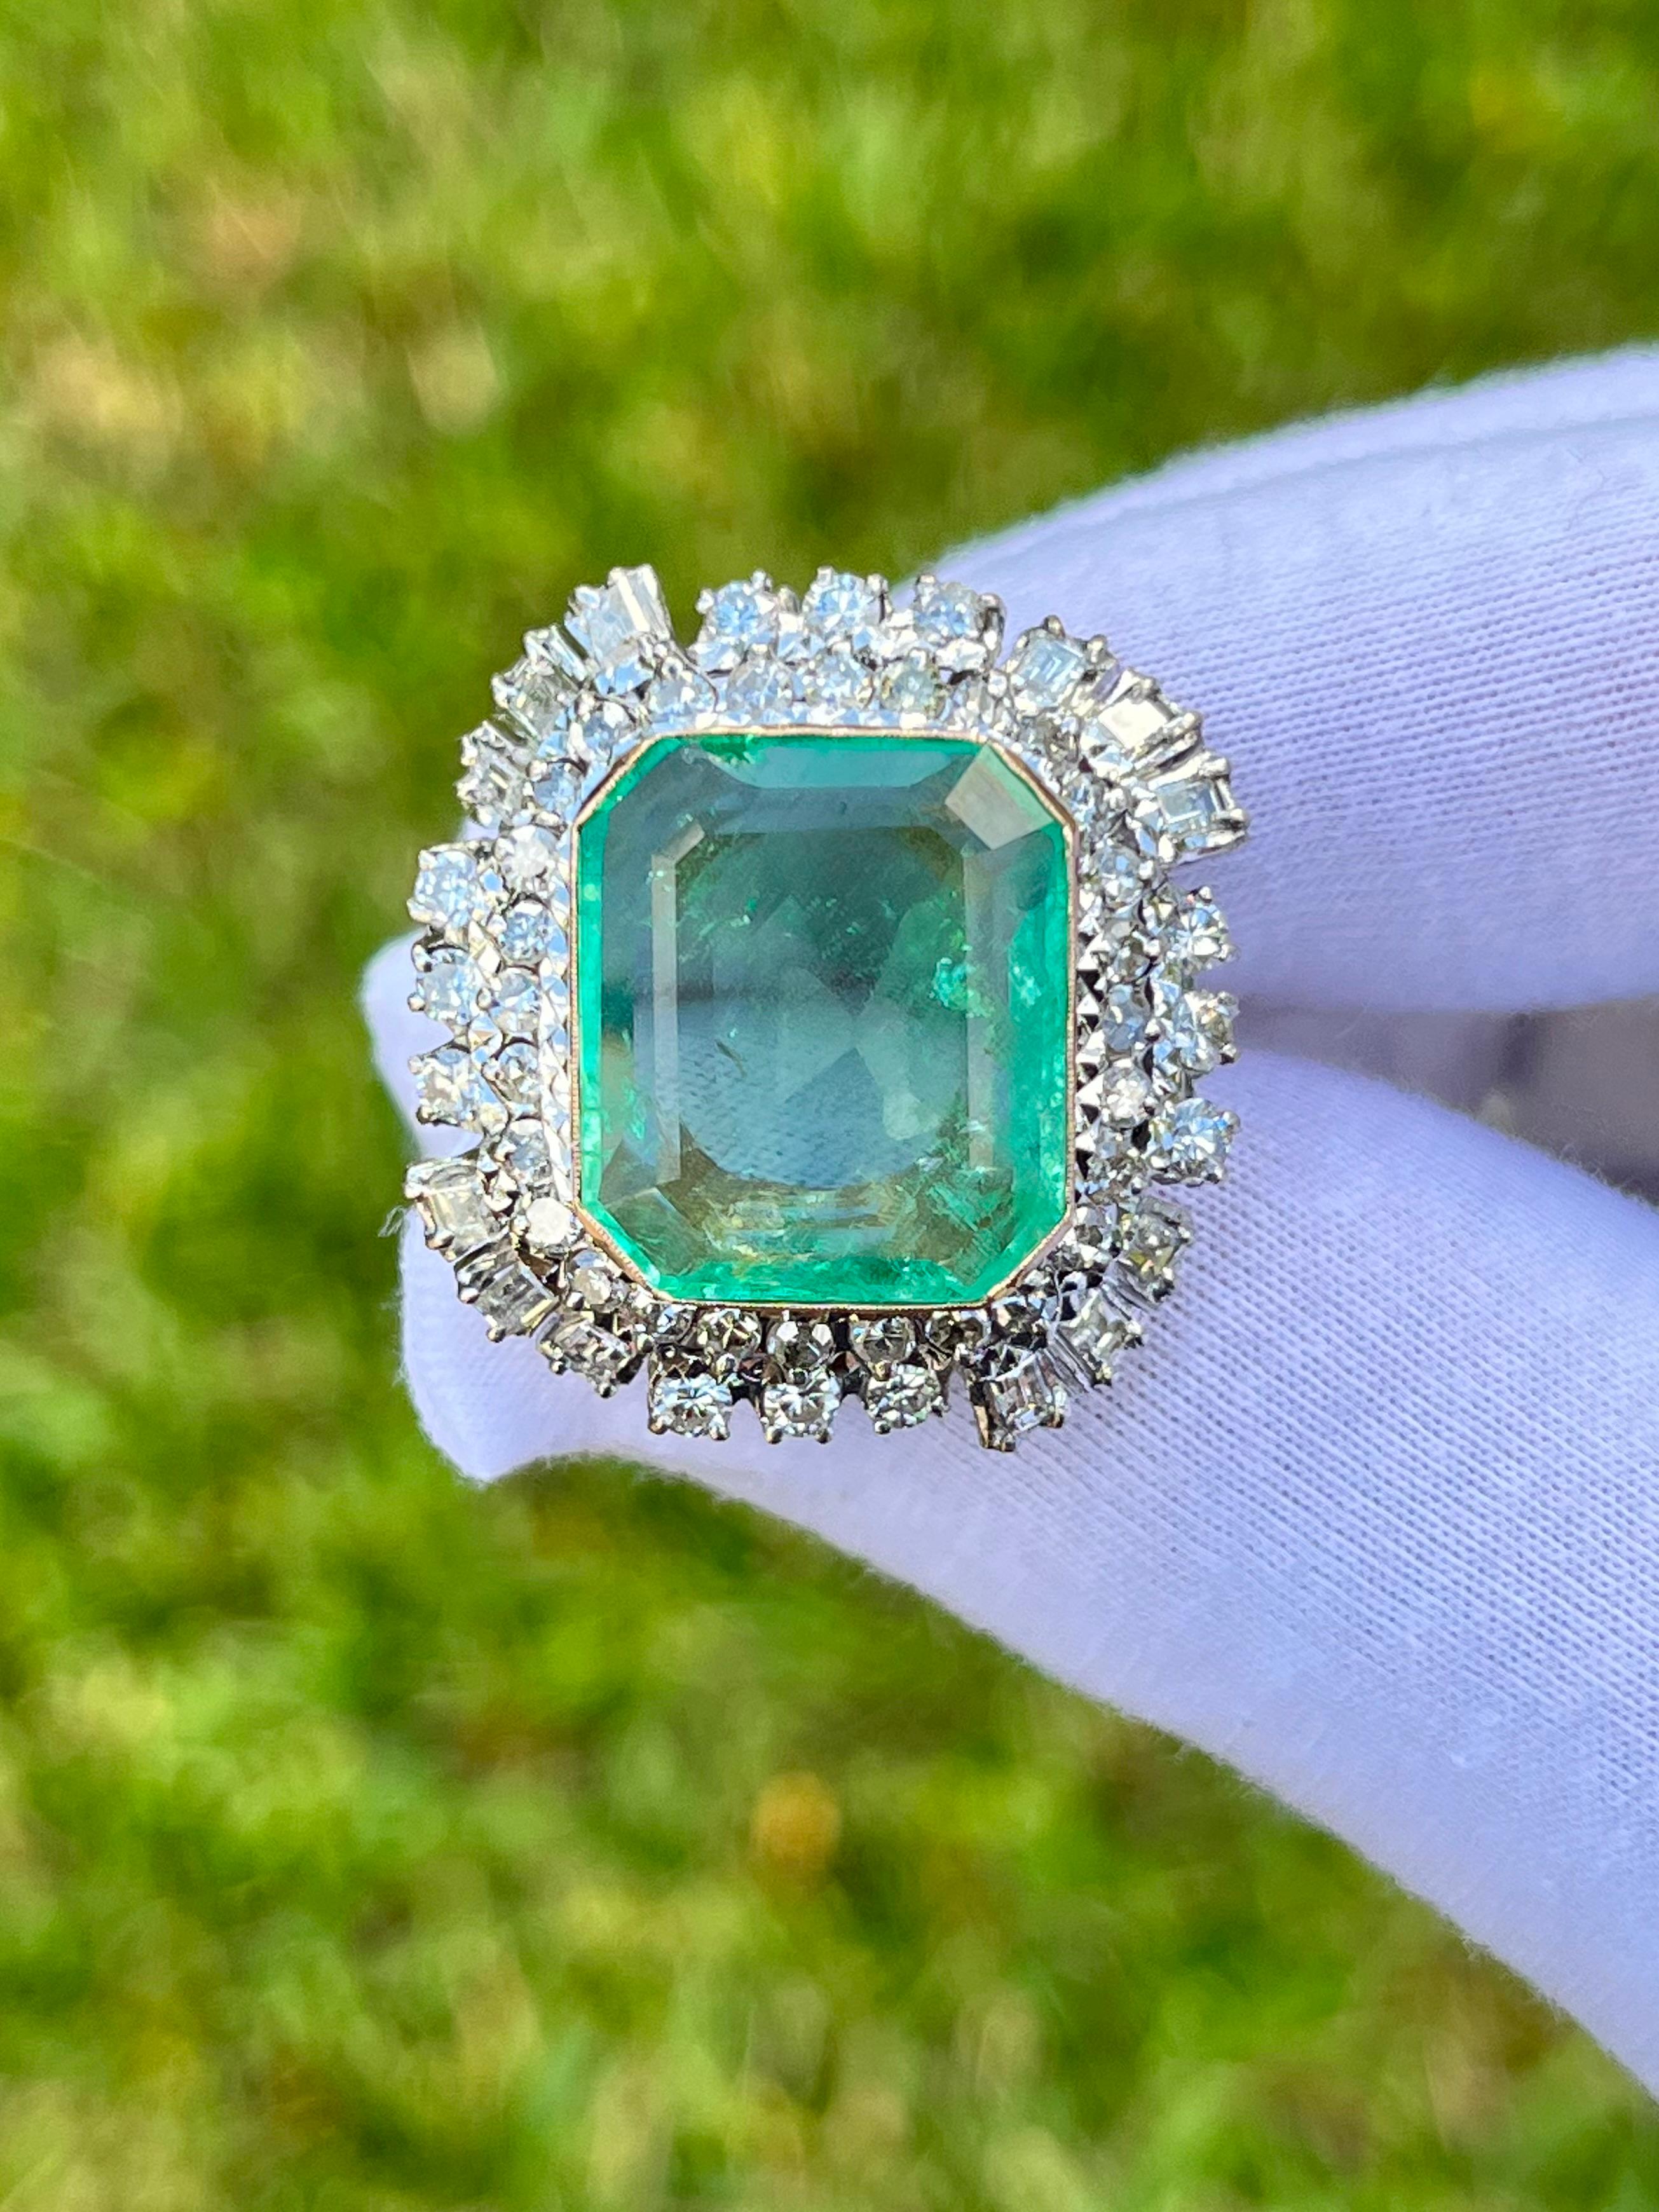 Top-quality natural Colombian Emerald set in vintage palladium ring. Center stone is mounted in an elaborate baguette and round cut diamond halo. This vintage ring is estimated to originate circa 1950.  

A true one-of-a-kind, handmade ring. This